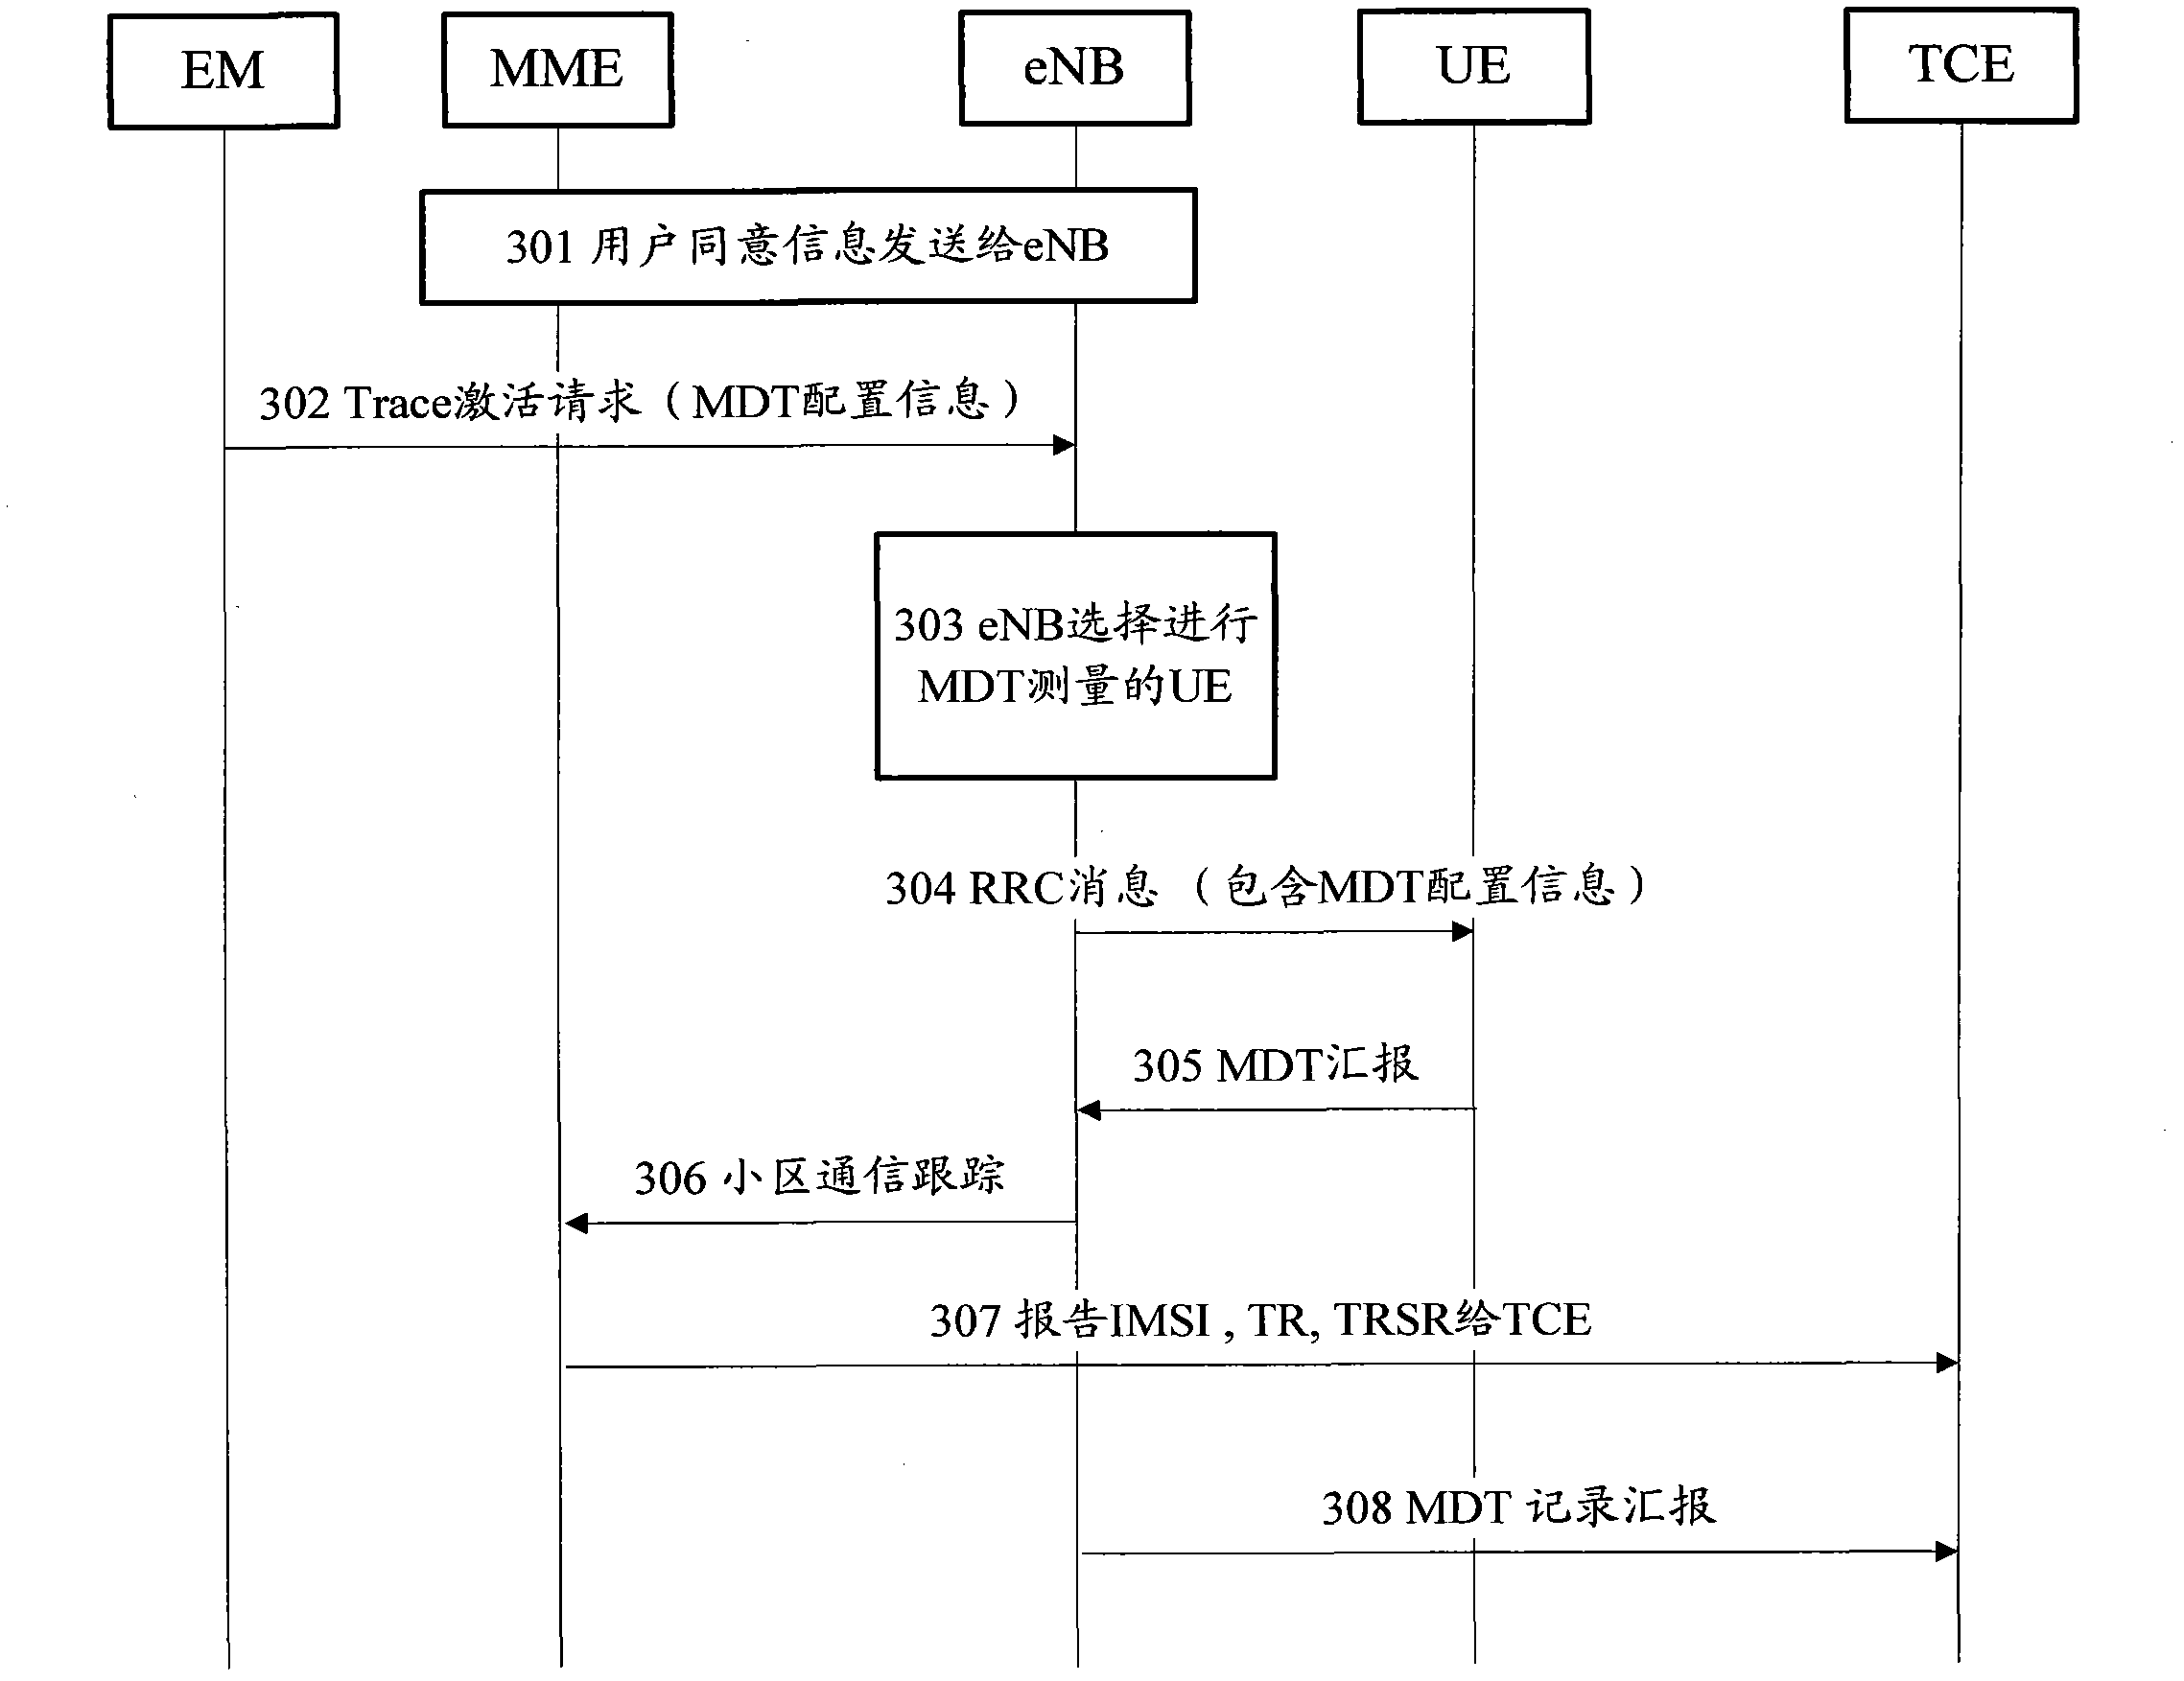 Method of achieving Mobile Data Terminal (MDT) measurement anonymity report